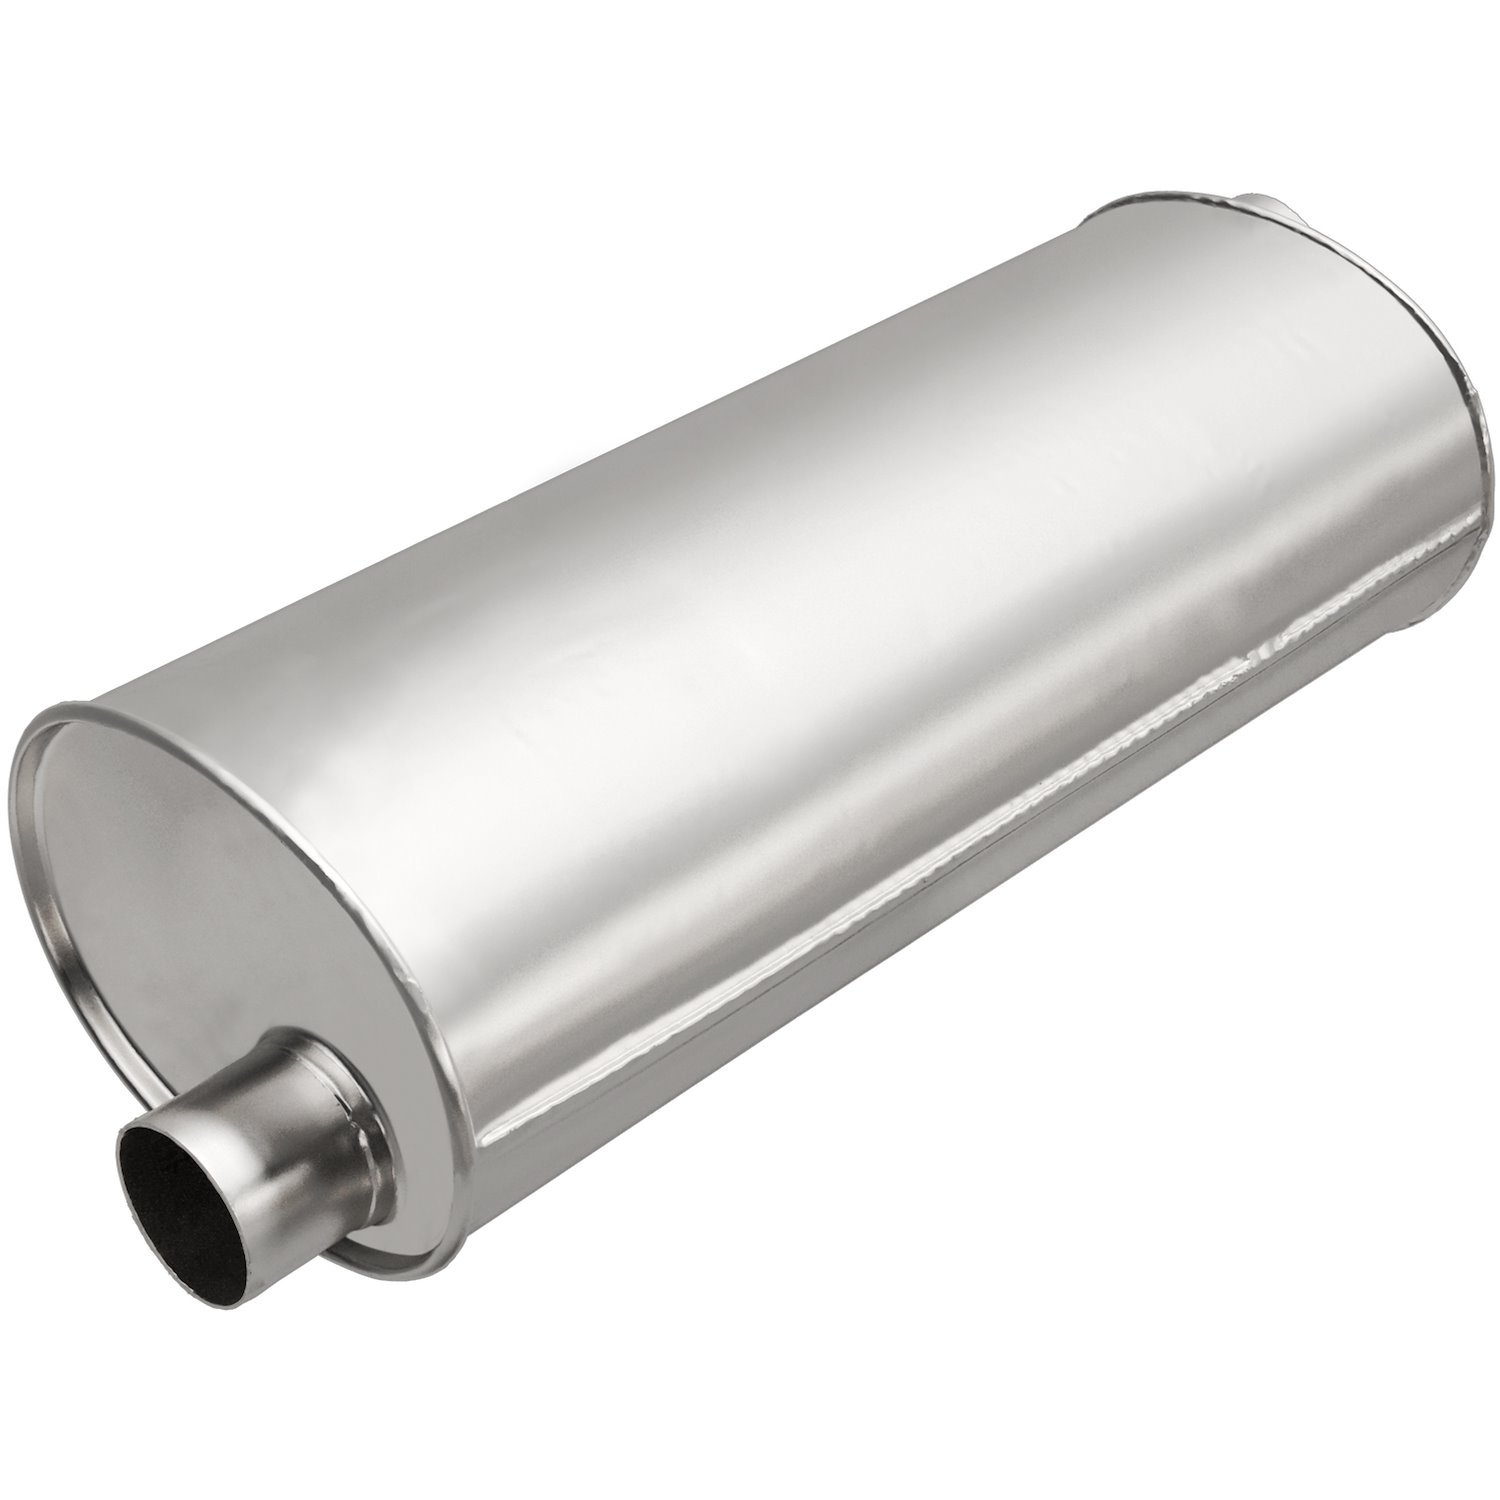 Direct-Fit Exhaust Muffler, 1997-2004 Ford F-150/F-150 Heritage/F-250